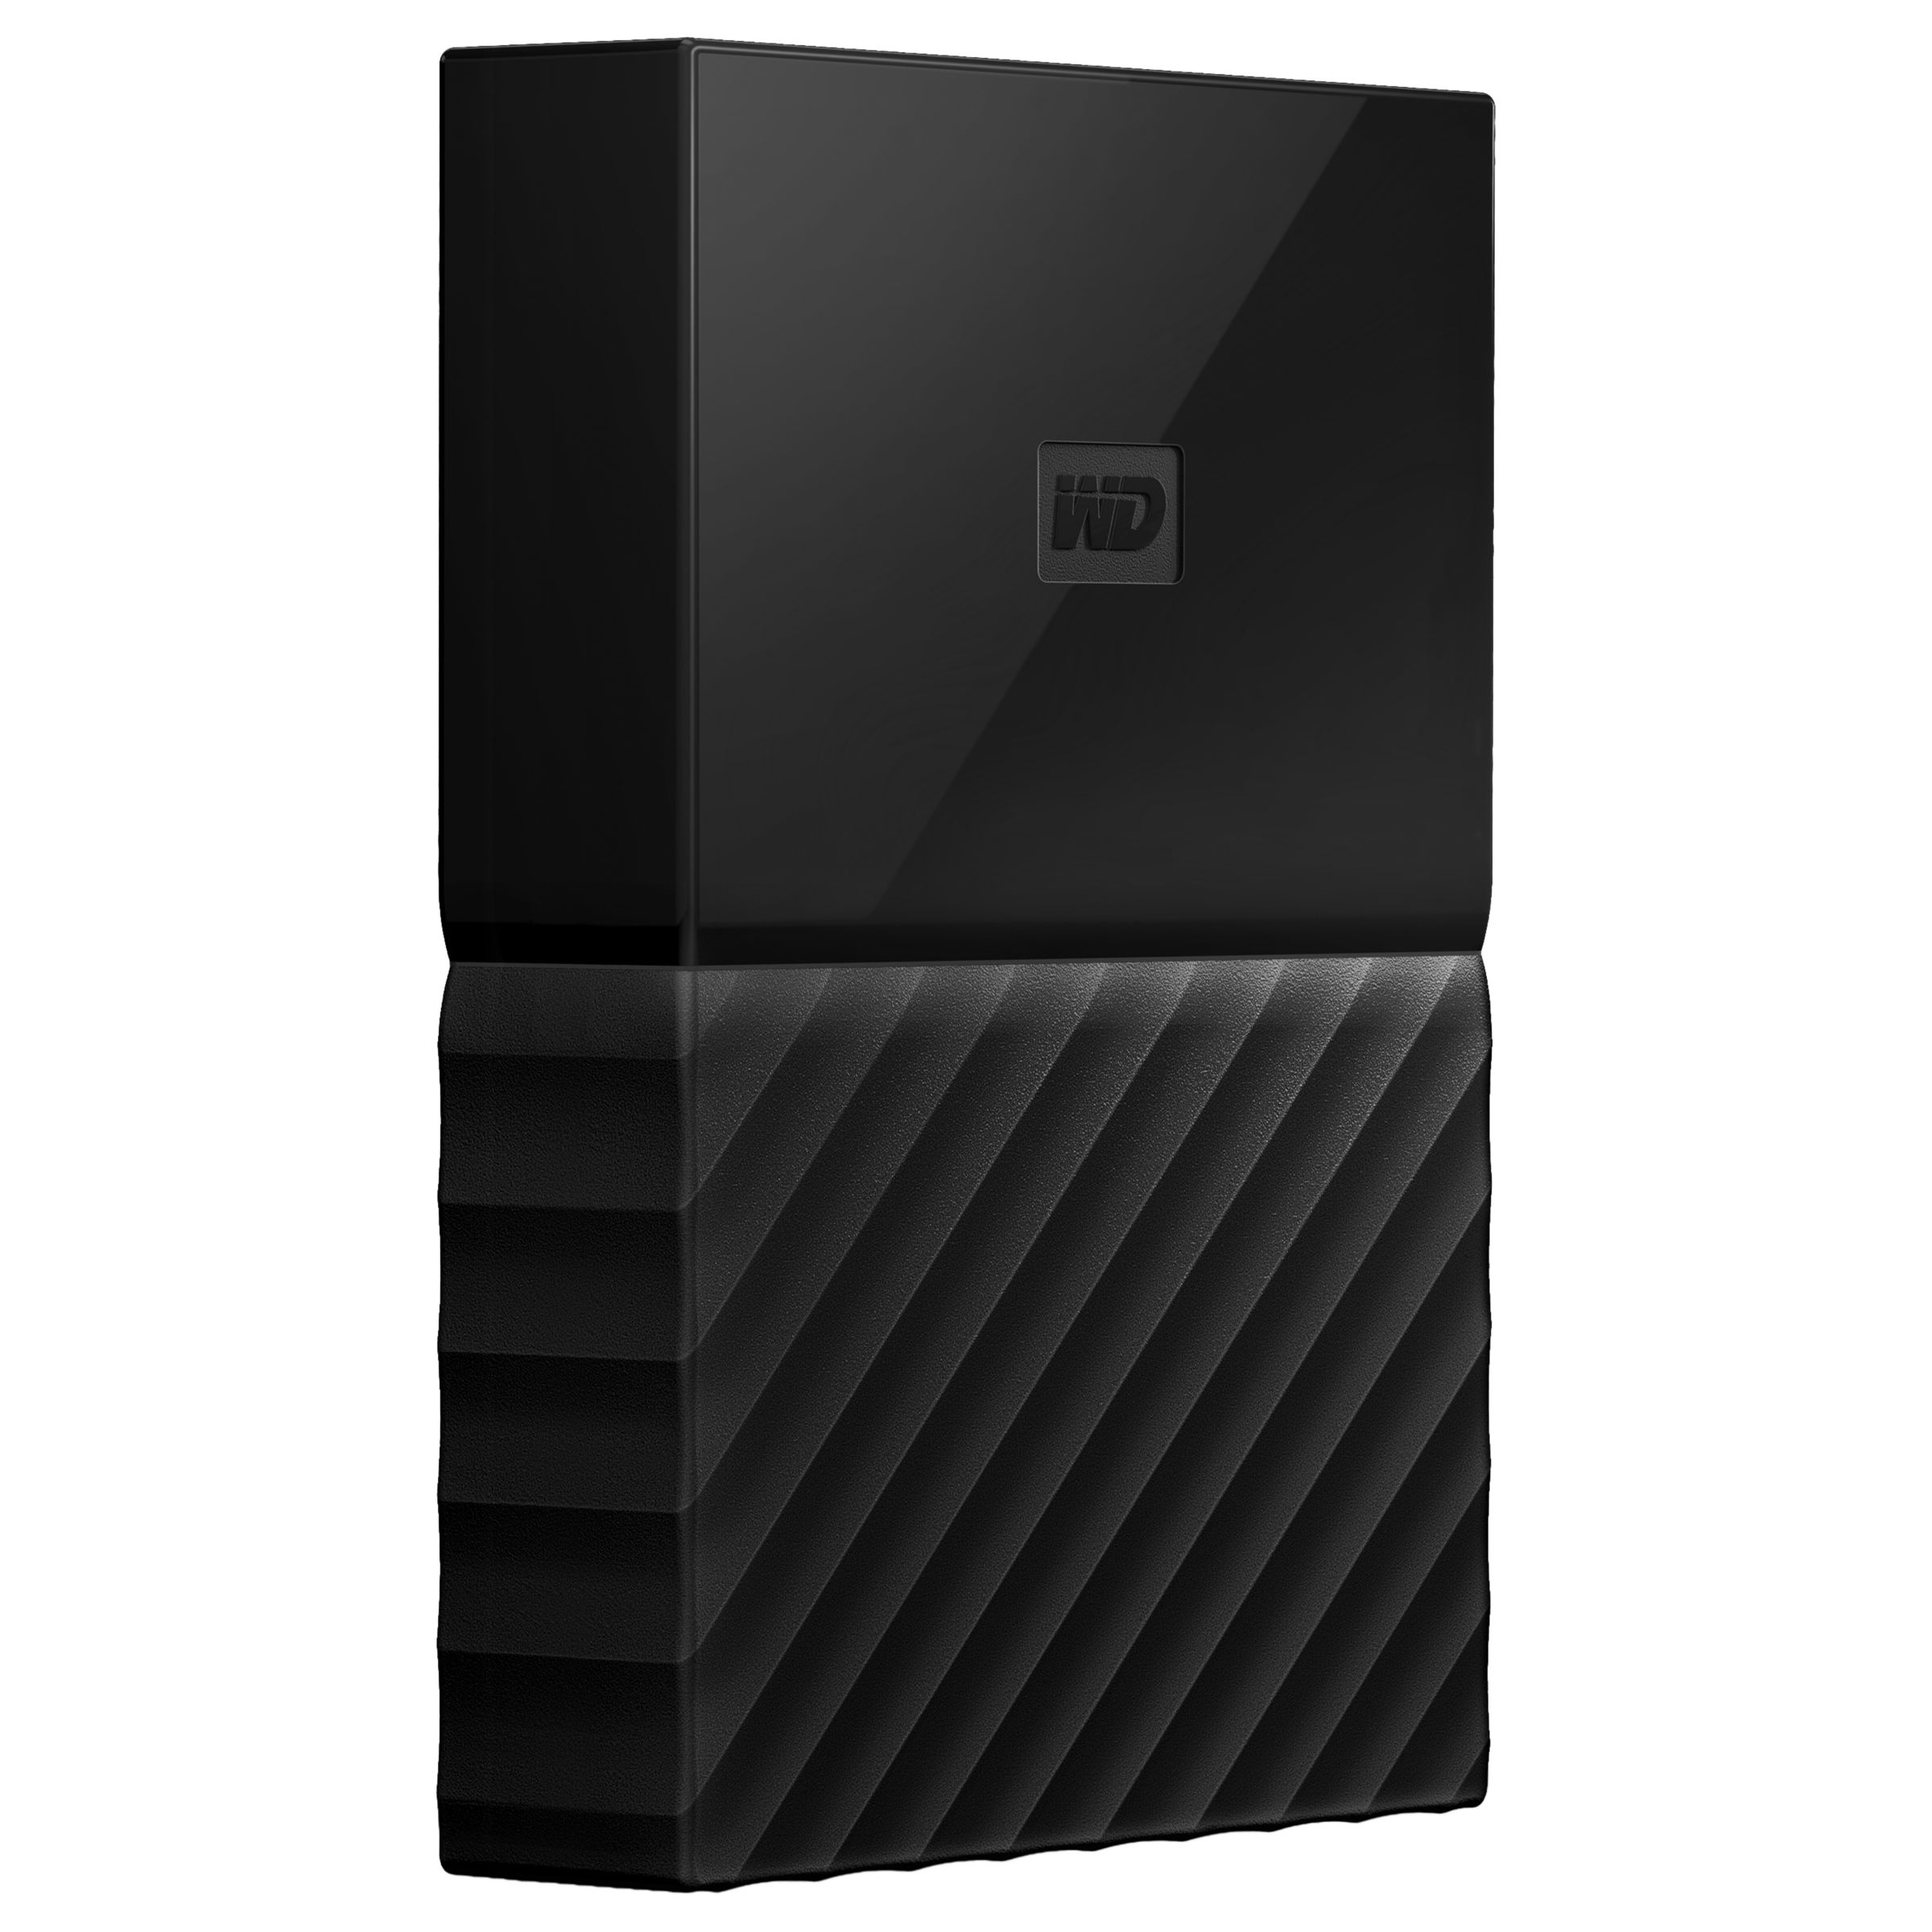 my passport for mac 2tb partitioning the drive